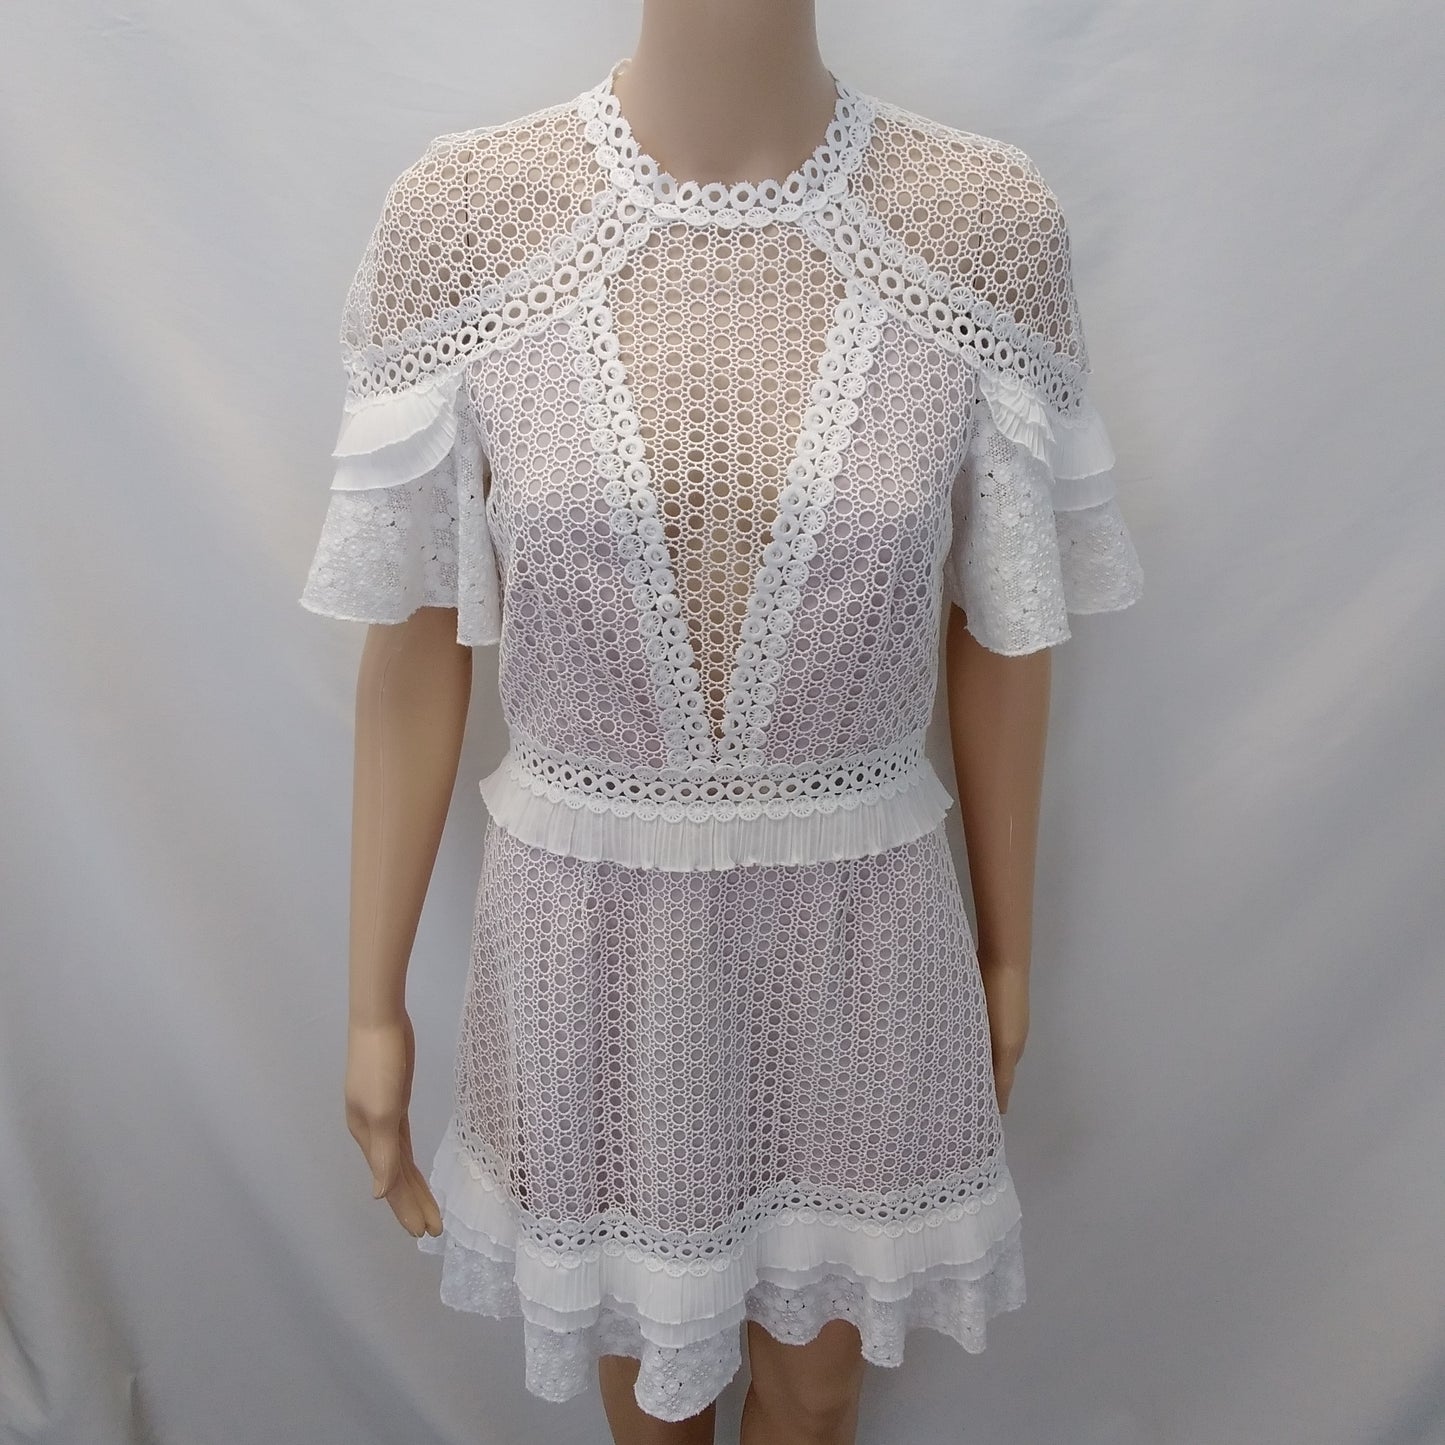 Saylor Short Sleeve White Crocheted Lace Open Back Dress - M